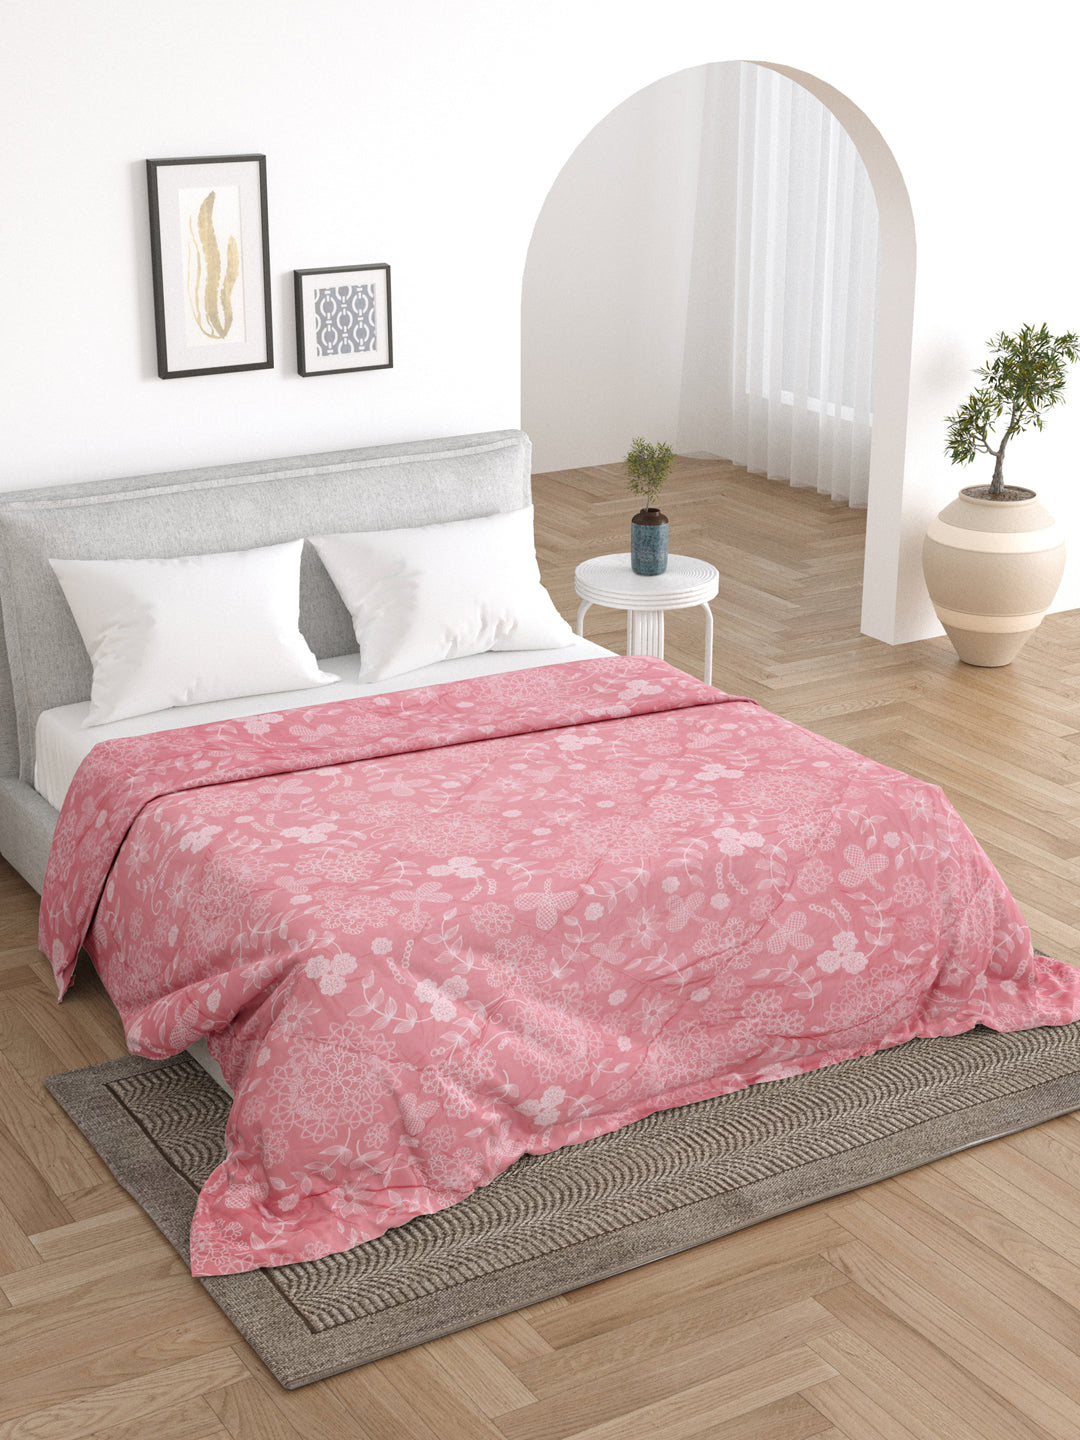 Pink Floral Print Double bed AC Comforter